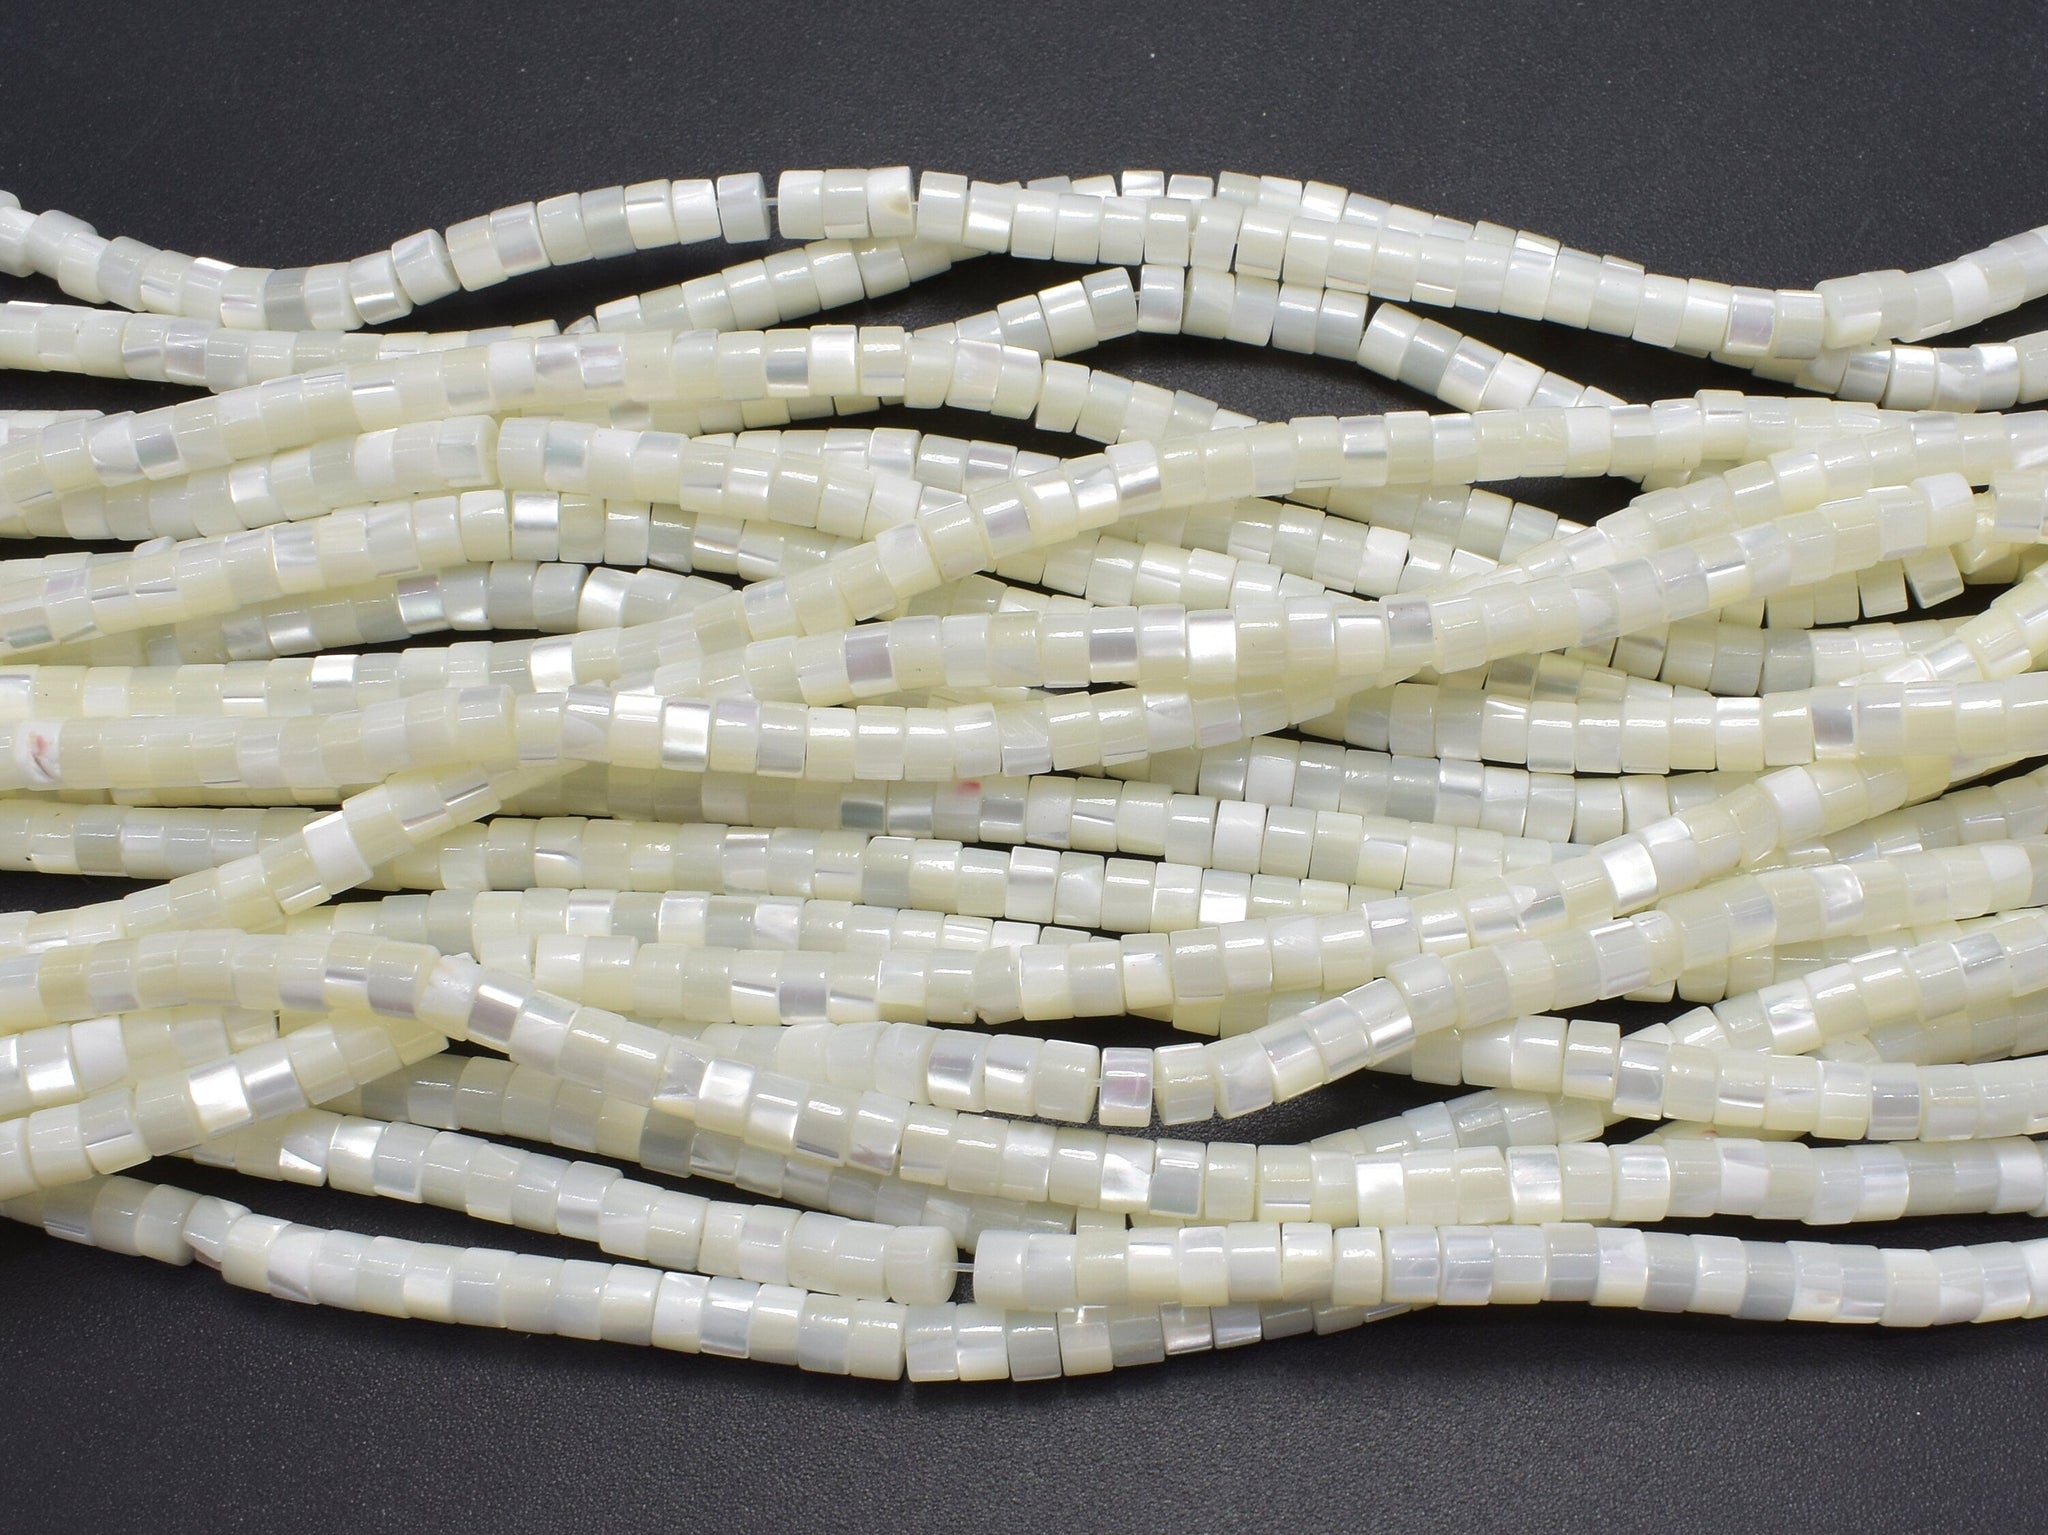 4mm White Mother of Pearl Heishi Strand – Beads, Inc.